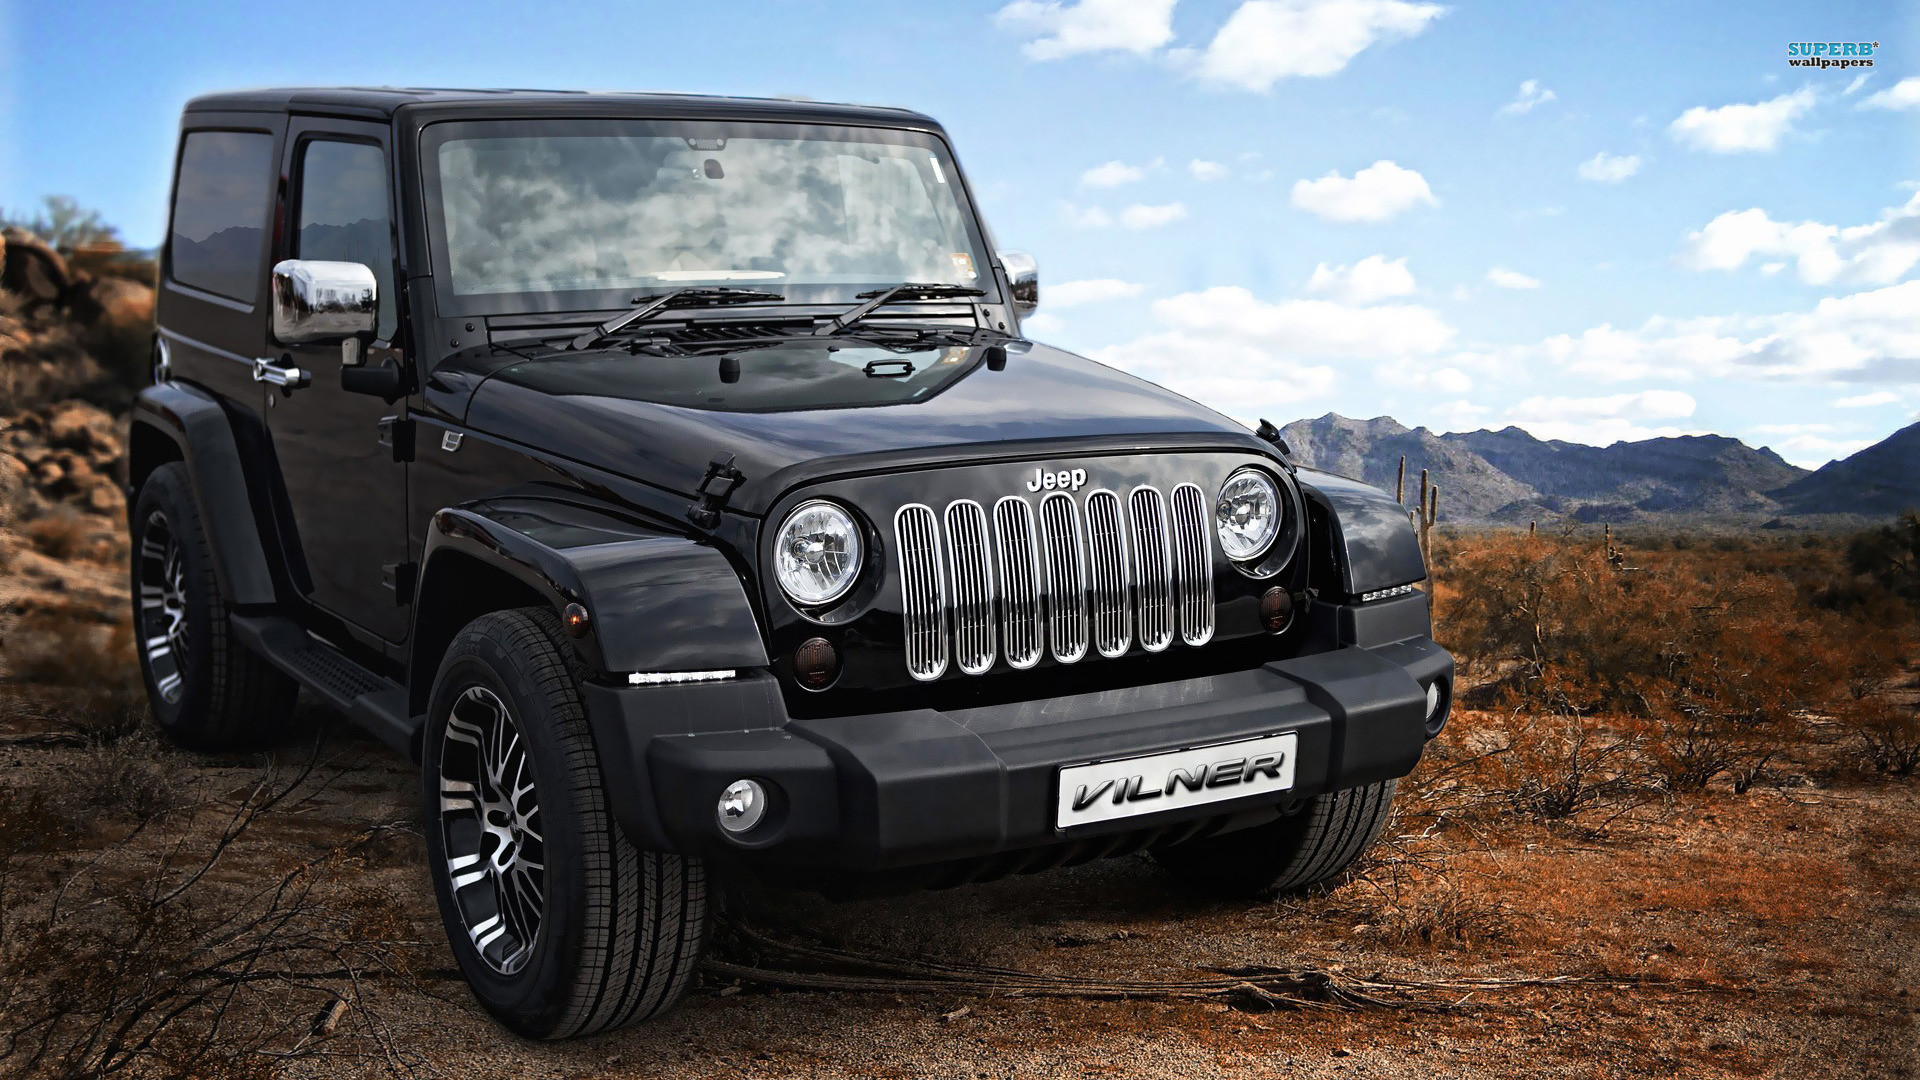 1920x1080 ... jeep wallpapers hd; jeep wrangler wallpapers images photos pictures  backgrounds ...